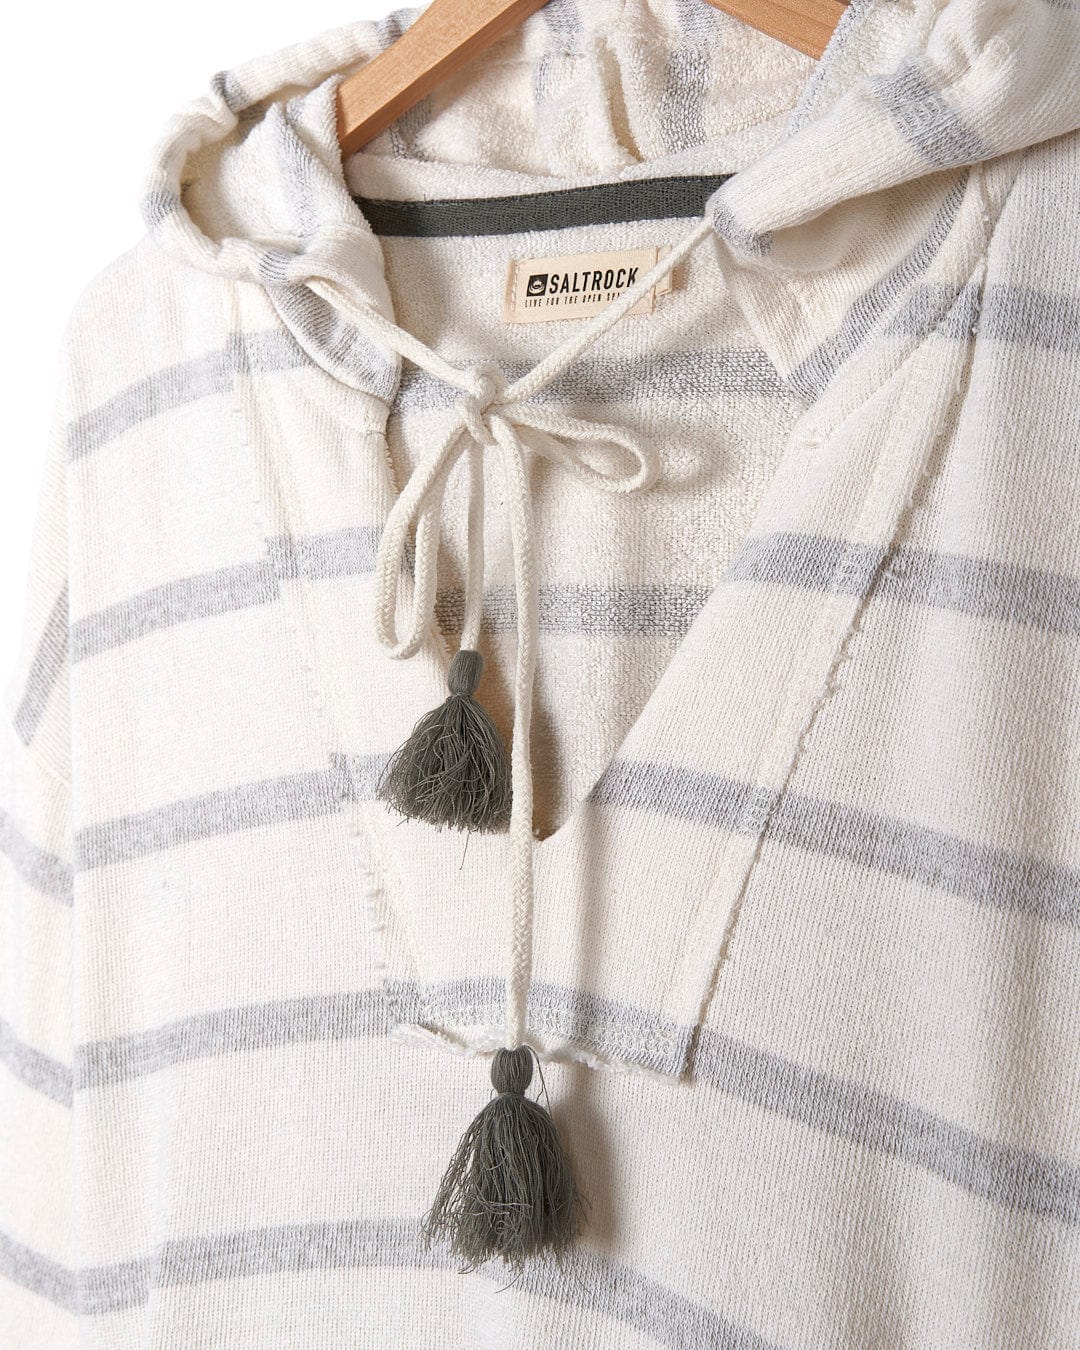 A white and grey striped Kennedy - Womens Pop Hoodie - Cream with a tassel. (Saltrock)